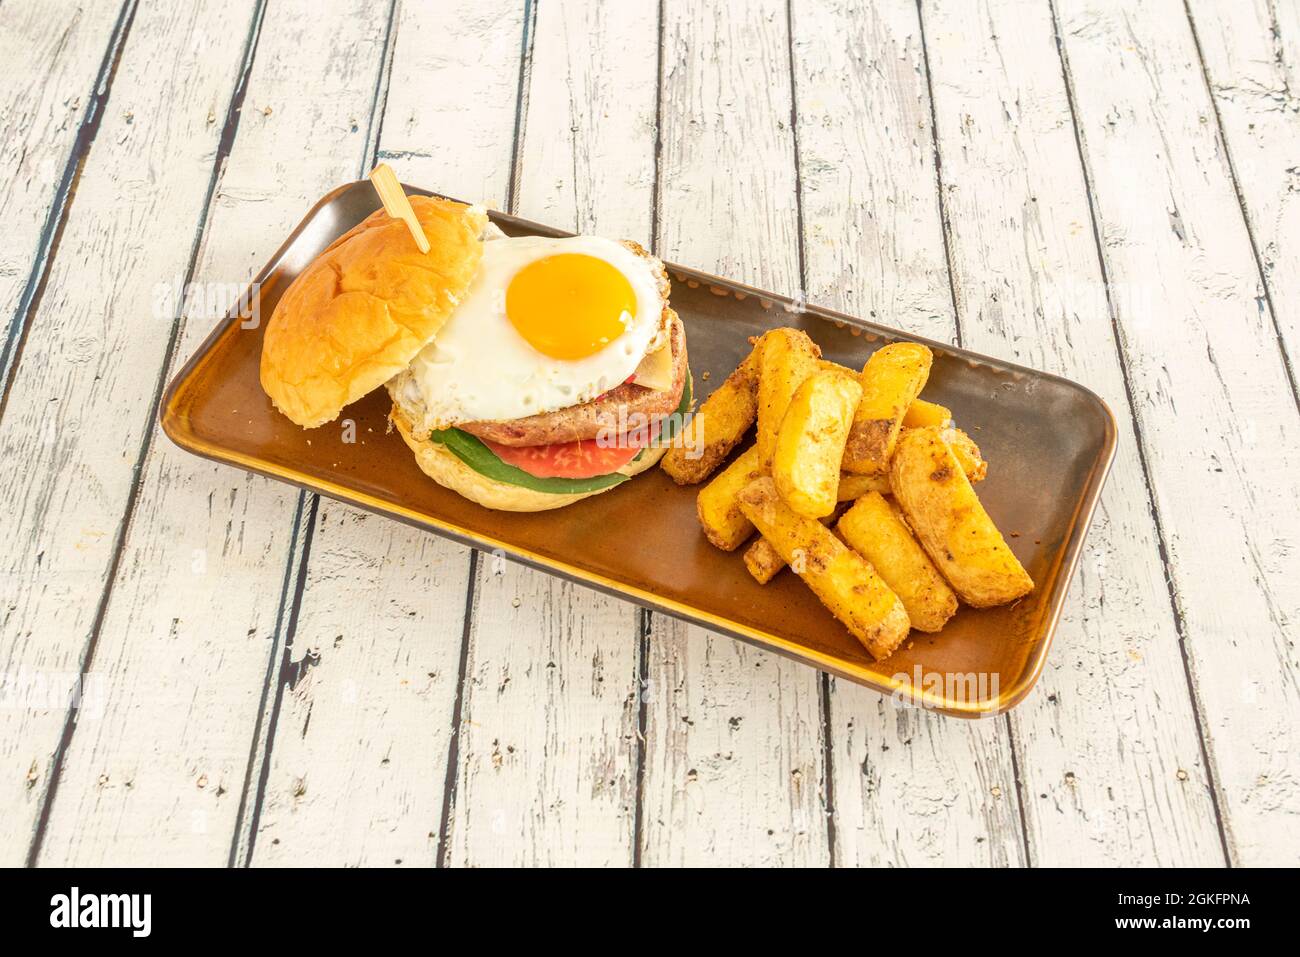 appetizing homemade burger with a fried egg with its shiny yolk and a side of deluxe fries with skin Stock Photo